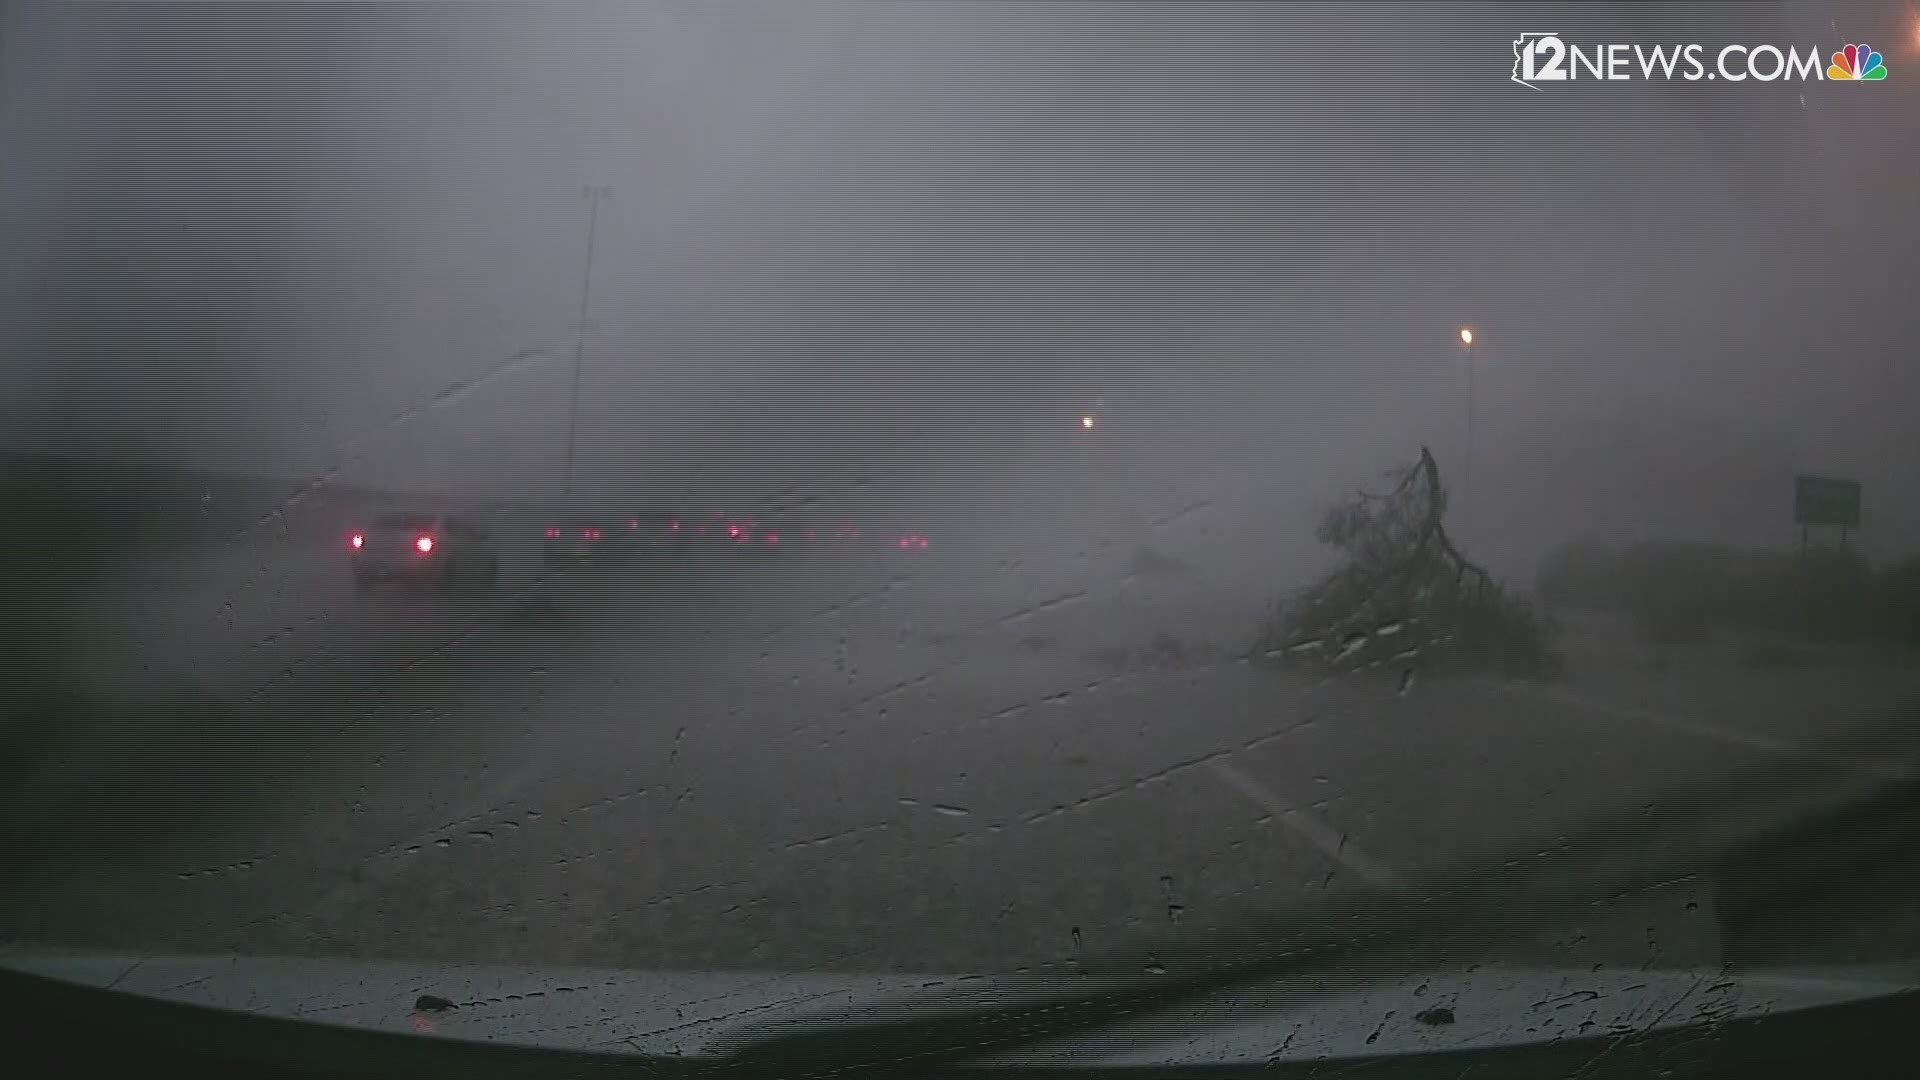 12 News was tracking the storm on I-10 when a tree branch blew onto the highway